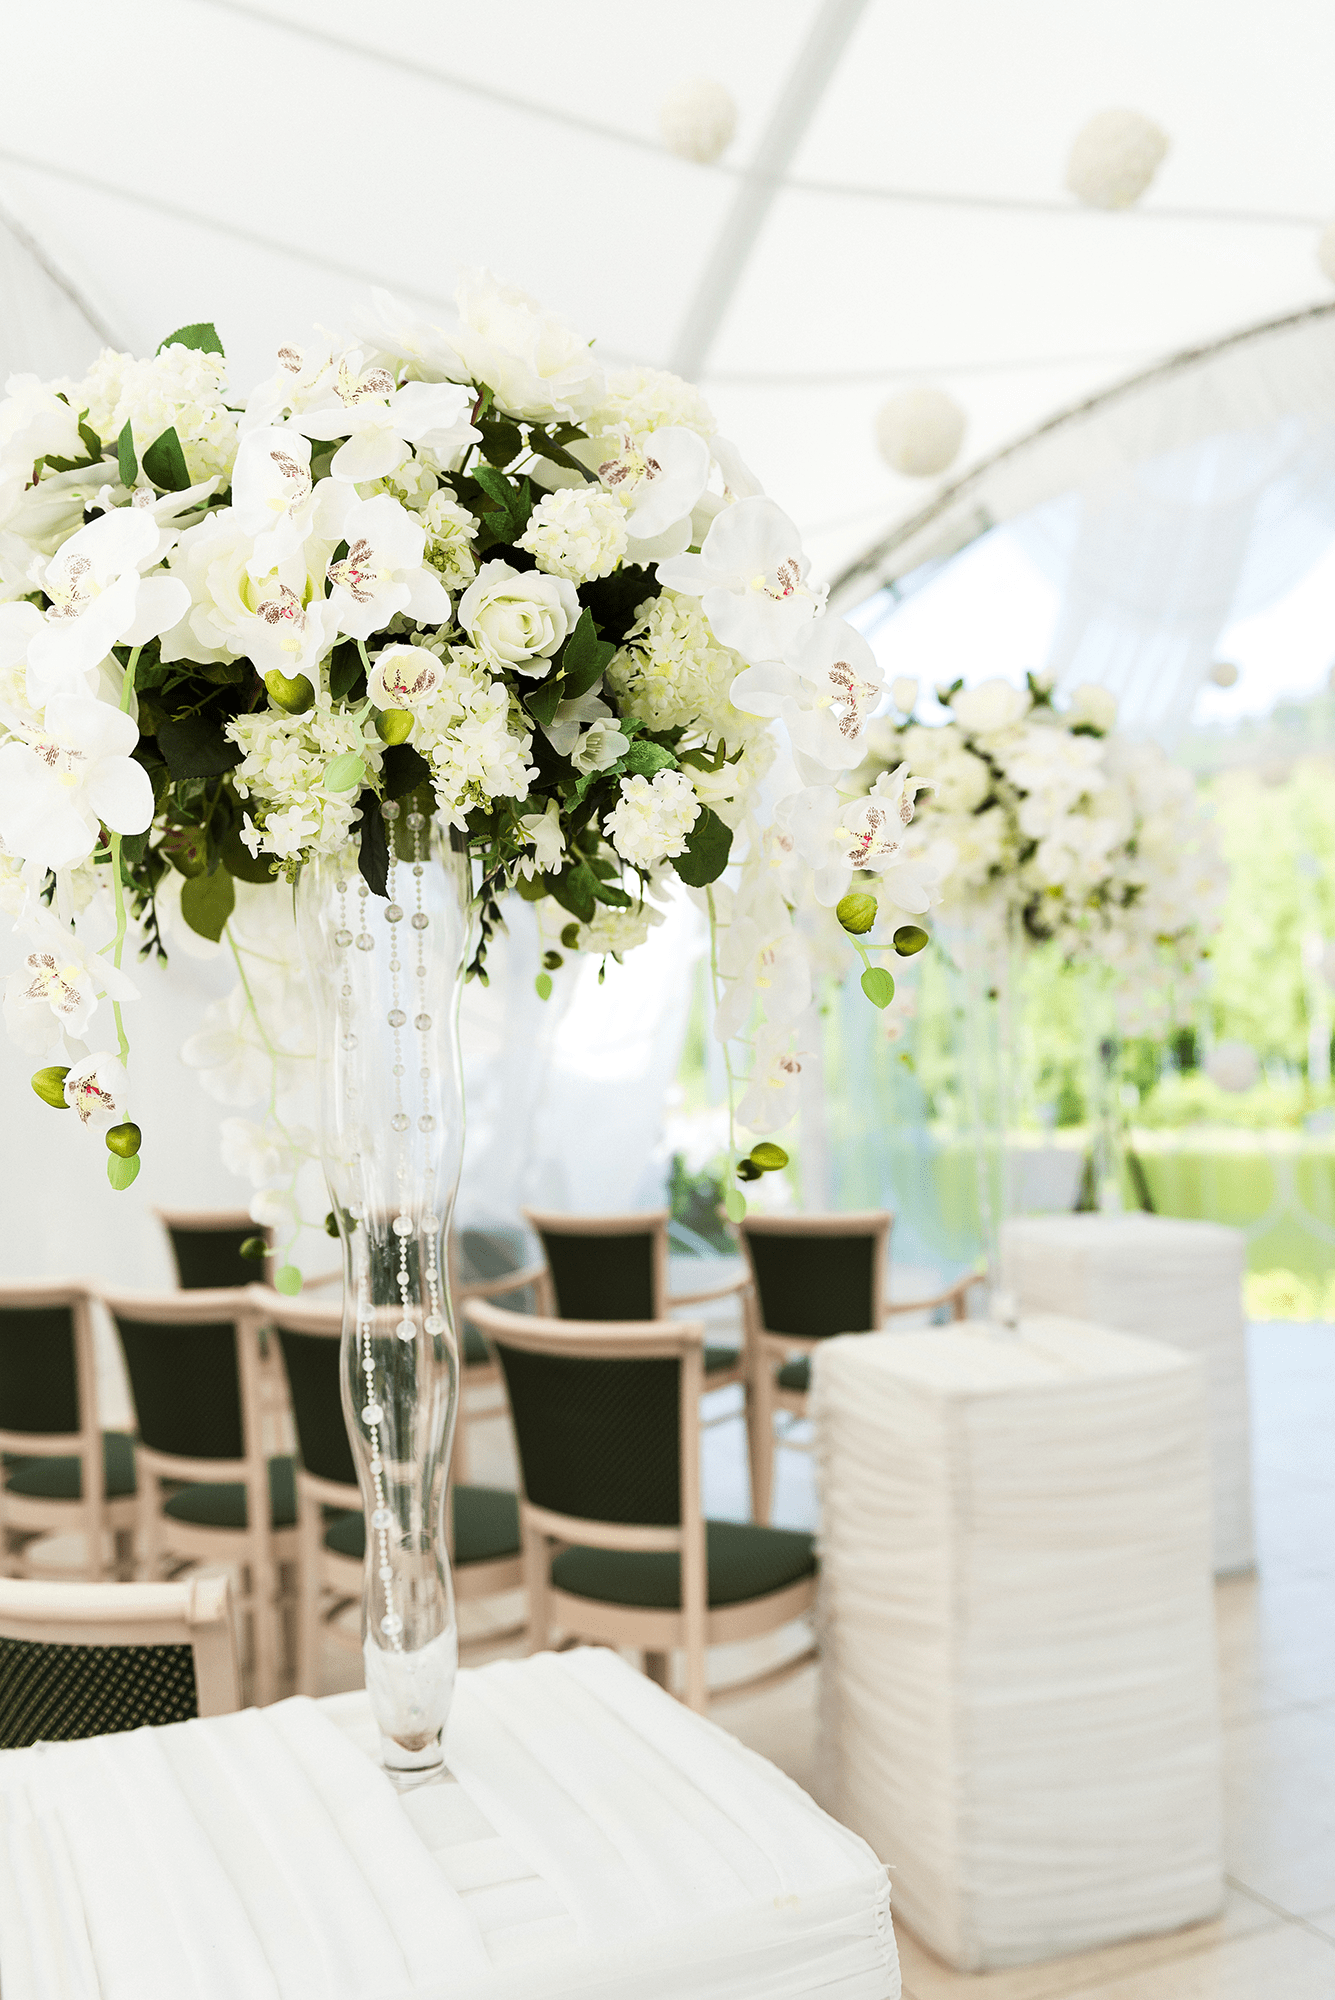 The benefits of a marquee wedding